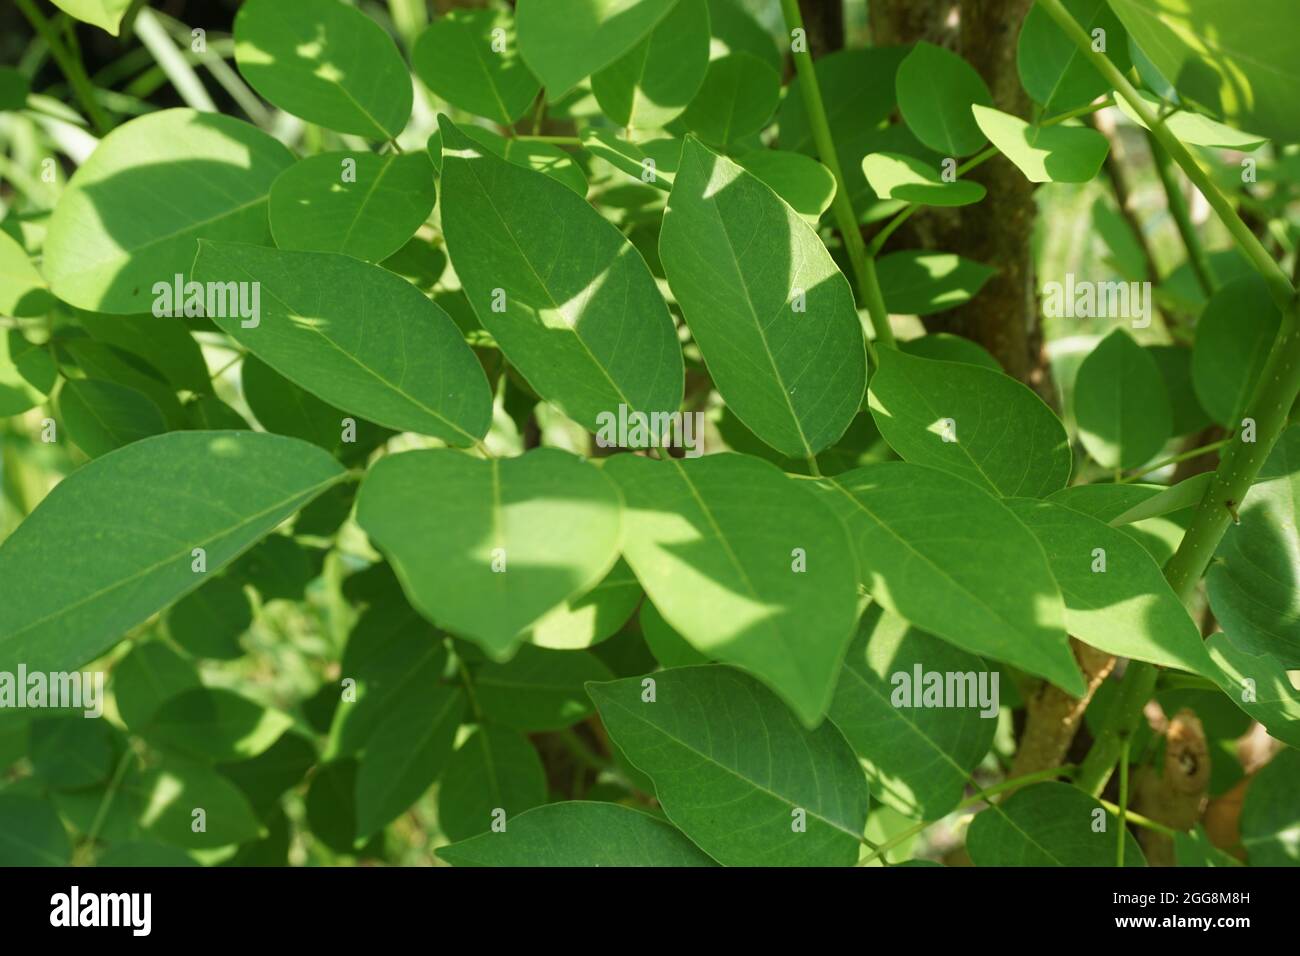 Dalbergia latifolia (also known as sonokeling, sanakeling, rosewood) with a natural background. Stock Photo